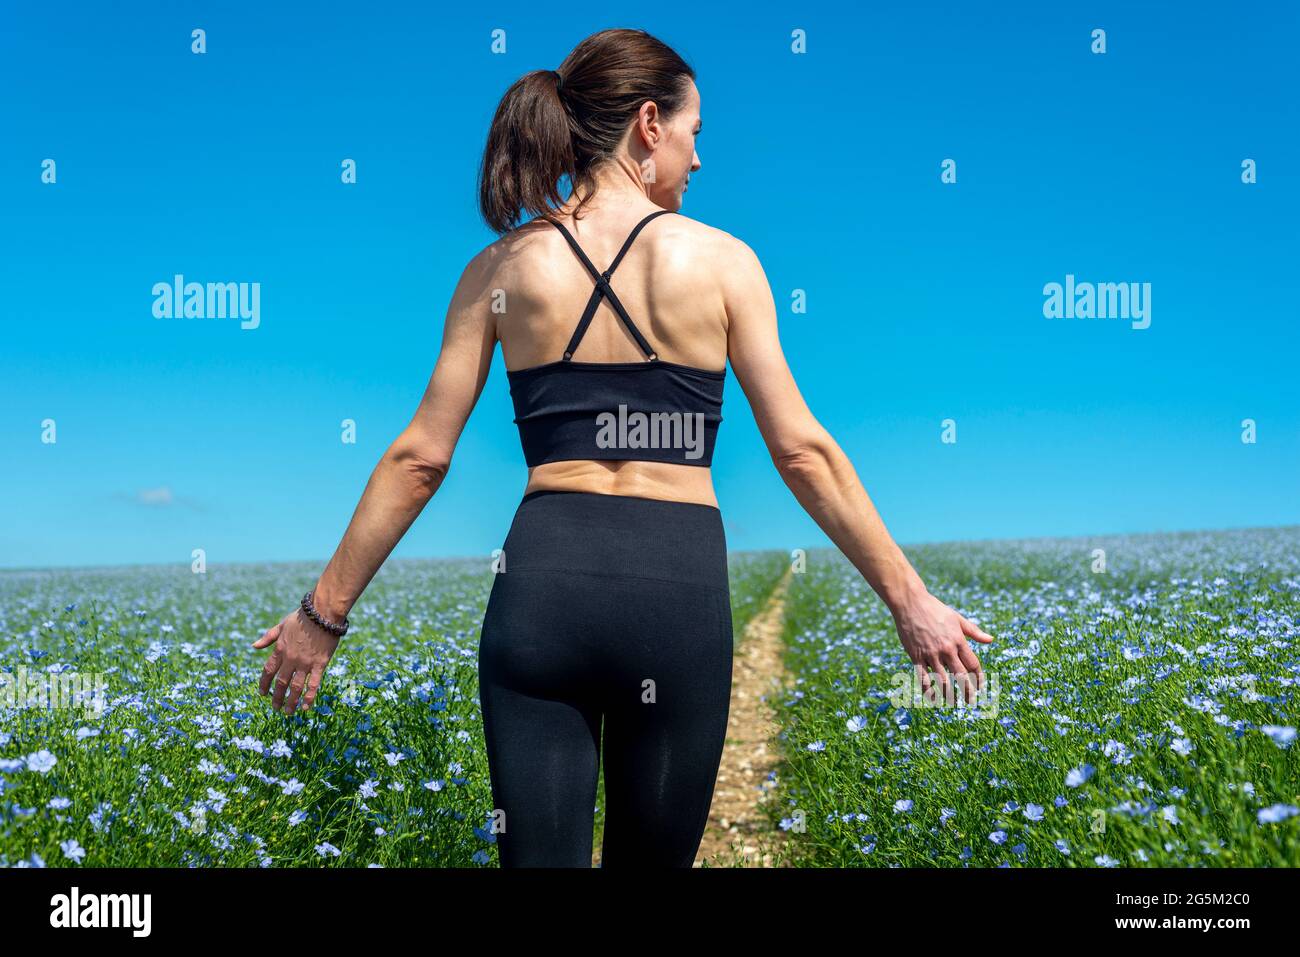 Rear view of a sporty woman wearing activewear walking through a field of flowers and touching them. At one with nature. Stock Photo